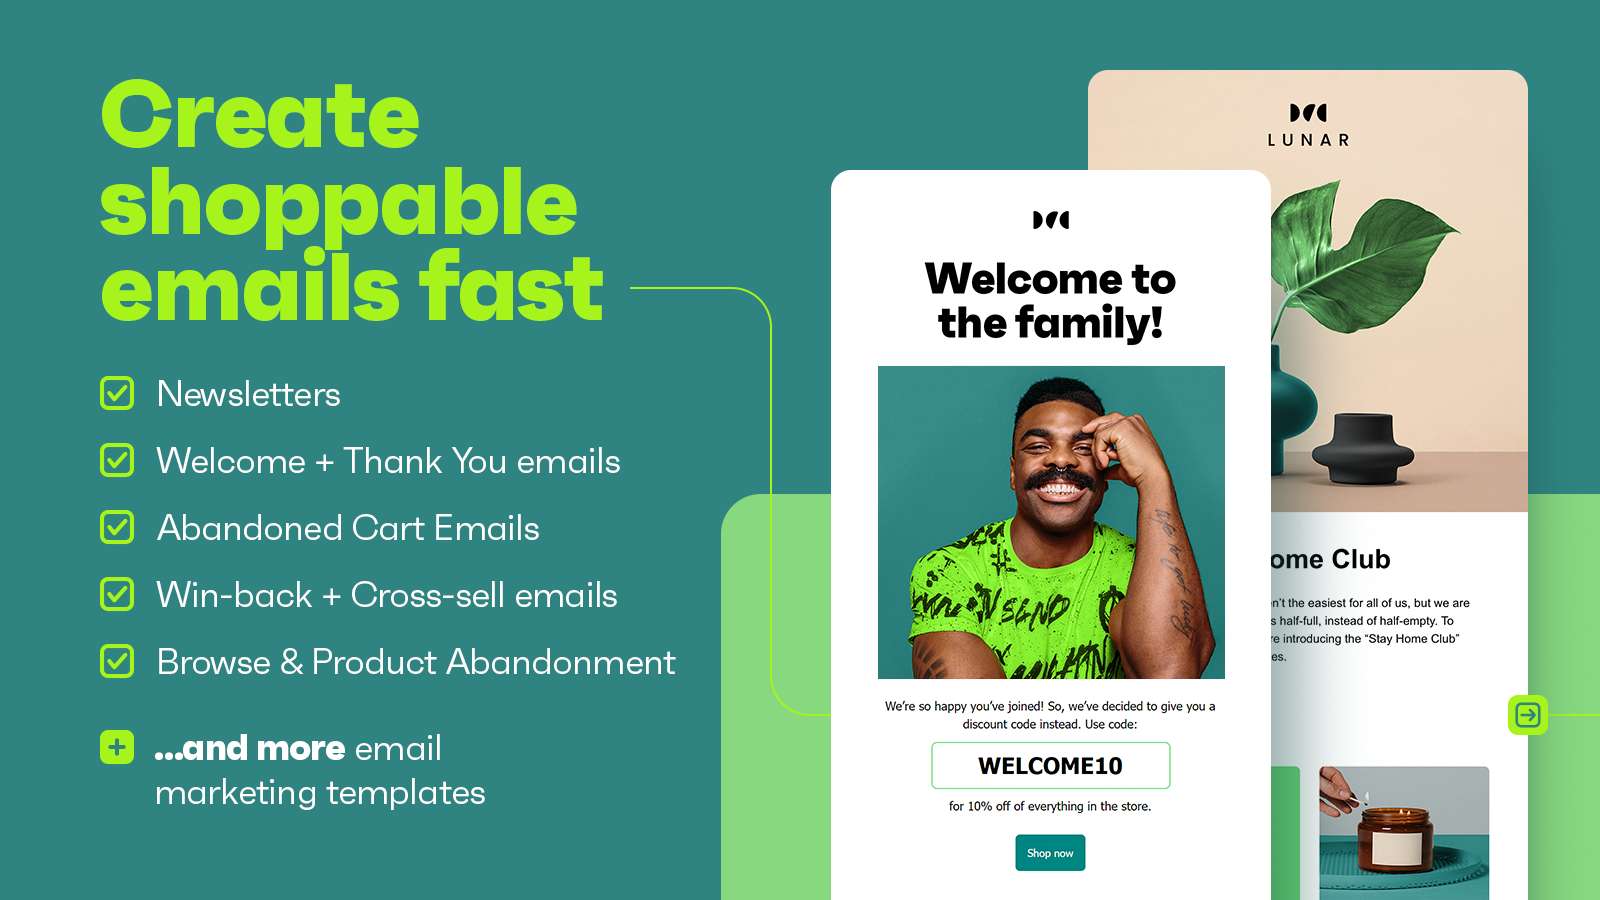 Omnisend Software - Create shoppable emails fast